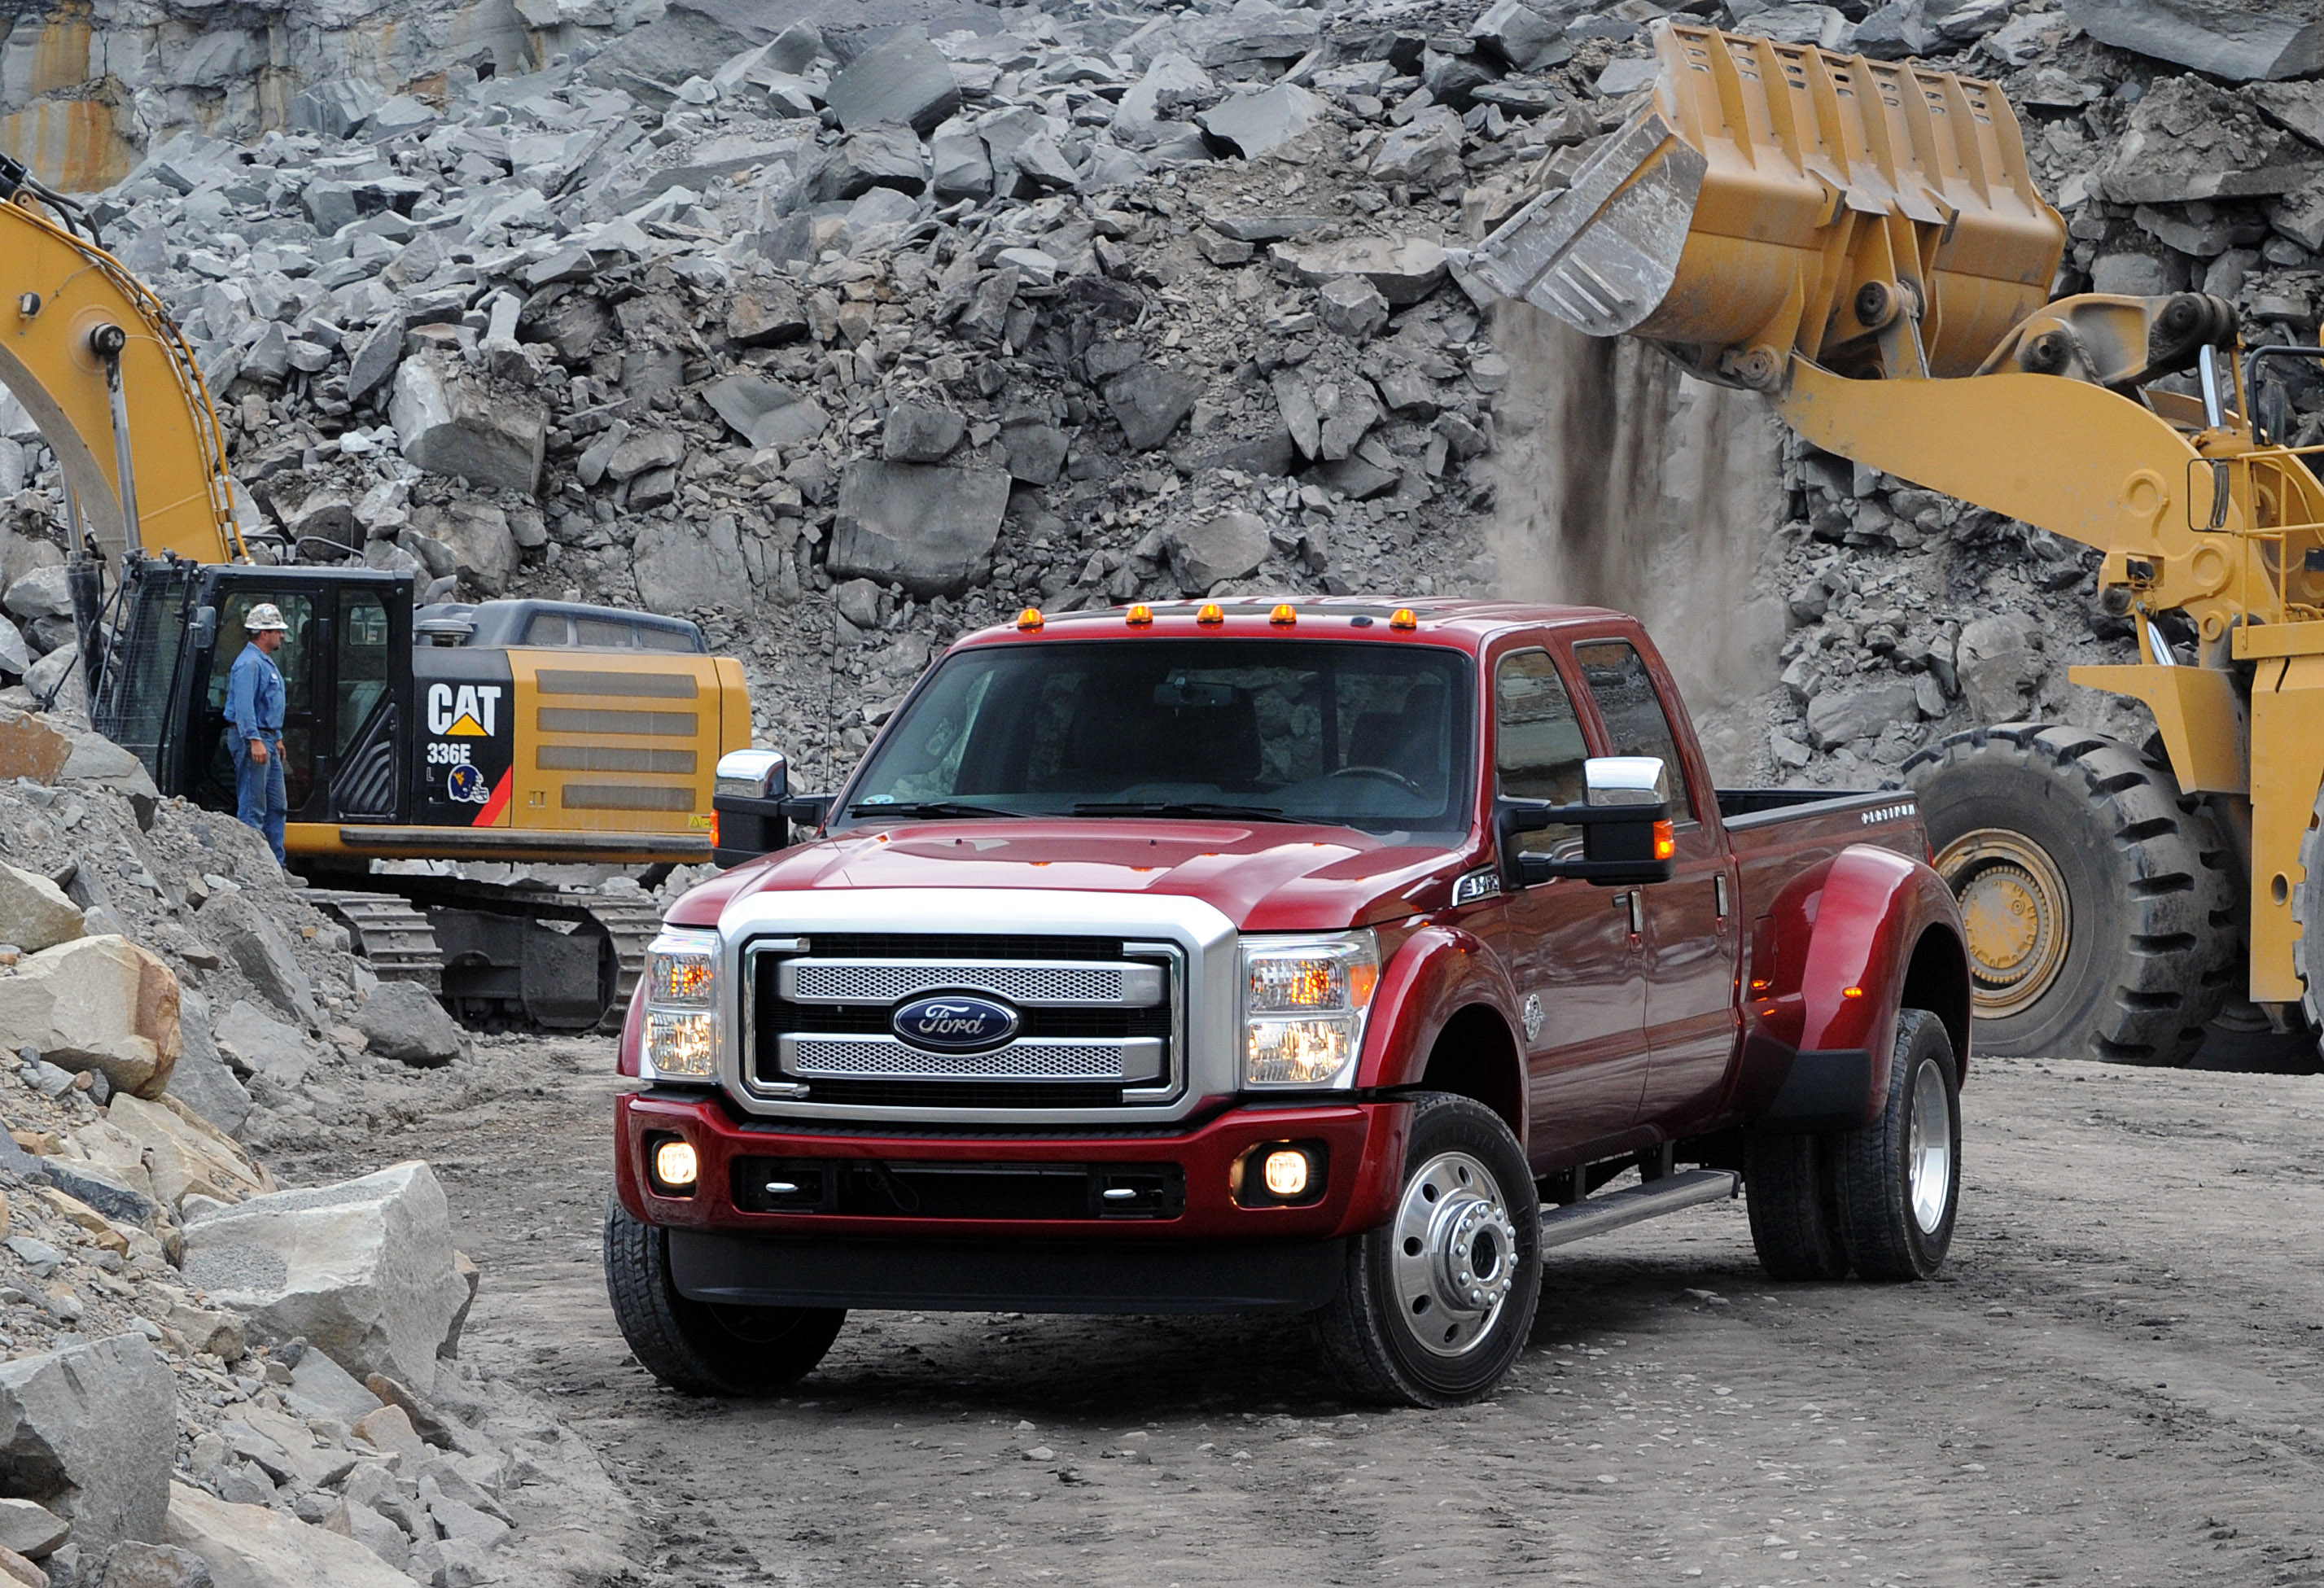 ULTIMATE TOWING MACHINE: 2015 FORD F-450 RATED BEST-IN-CLASS USING SOCIETY OF AUTOMOTIVE ENGINEERS J2807 STANDARD